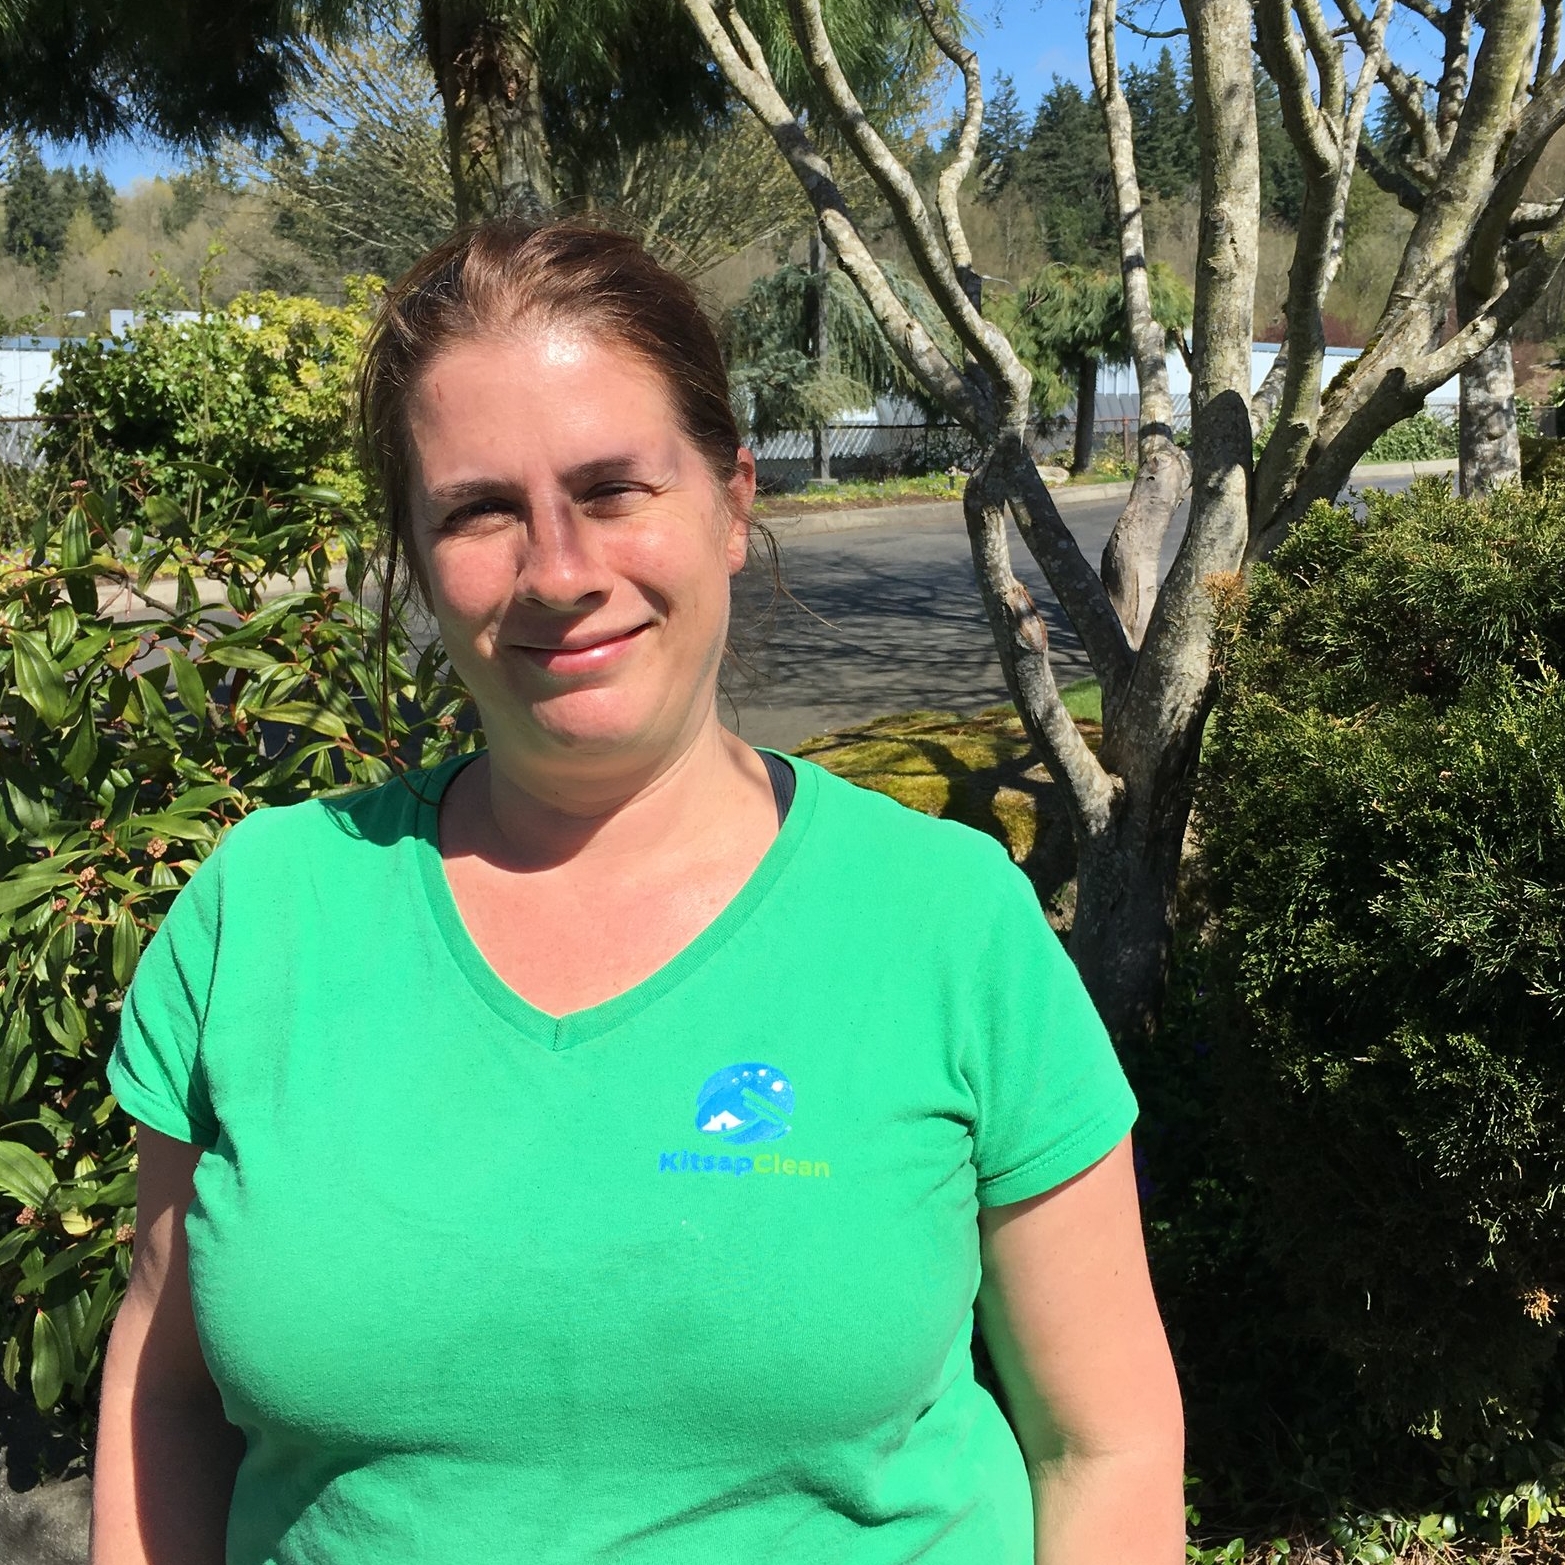 Avid environmentalist and technology advocate Michelle Day is the founder and owner of Kitsap Clean, one of the region's top home cleaning companies dedicated to eco-friendly and socially responsible practices.